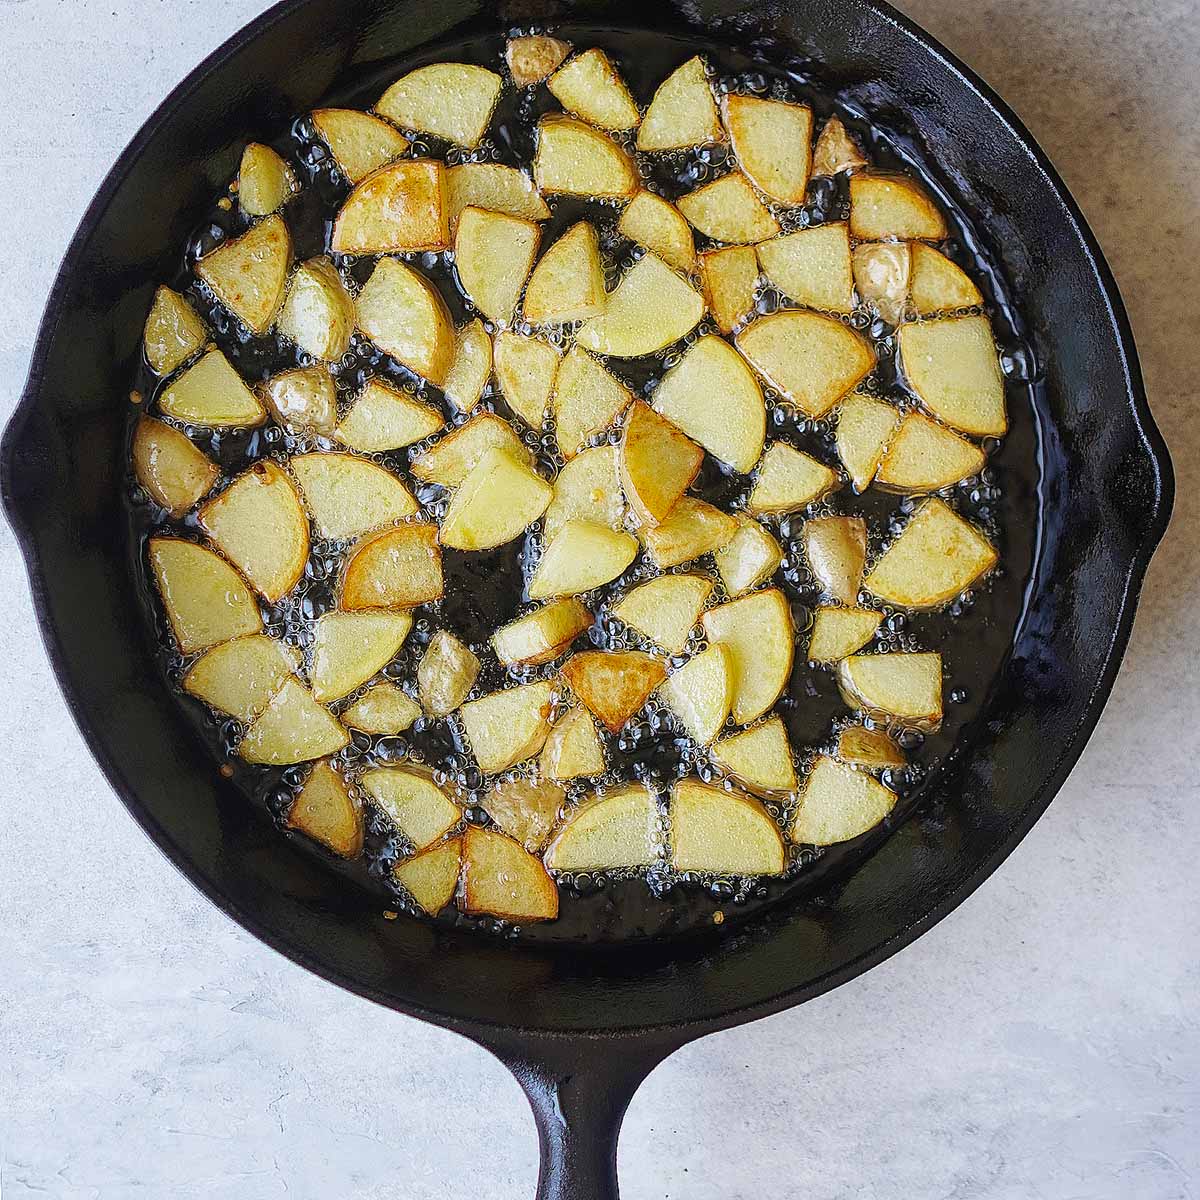 Frying potato slices in an iron skillet.